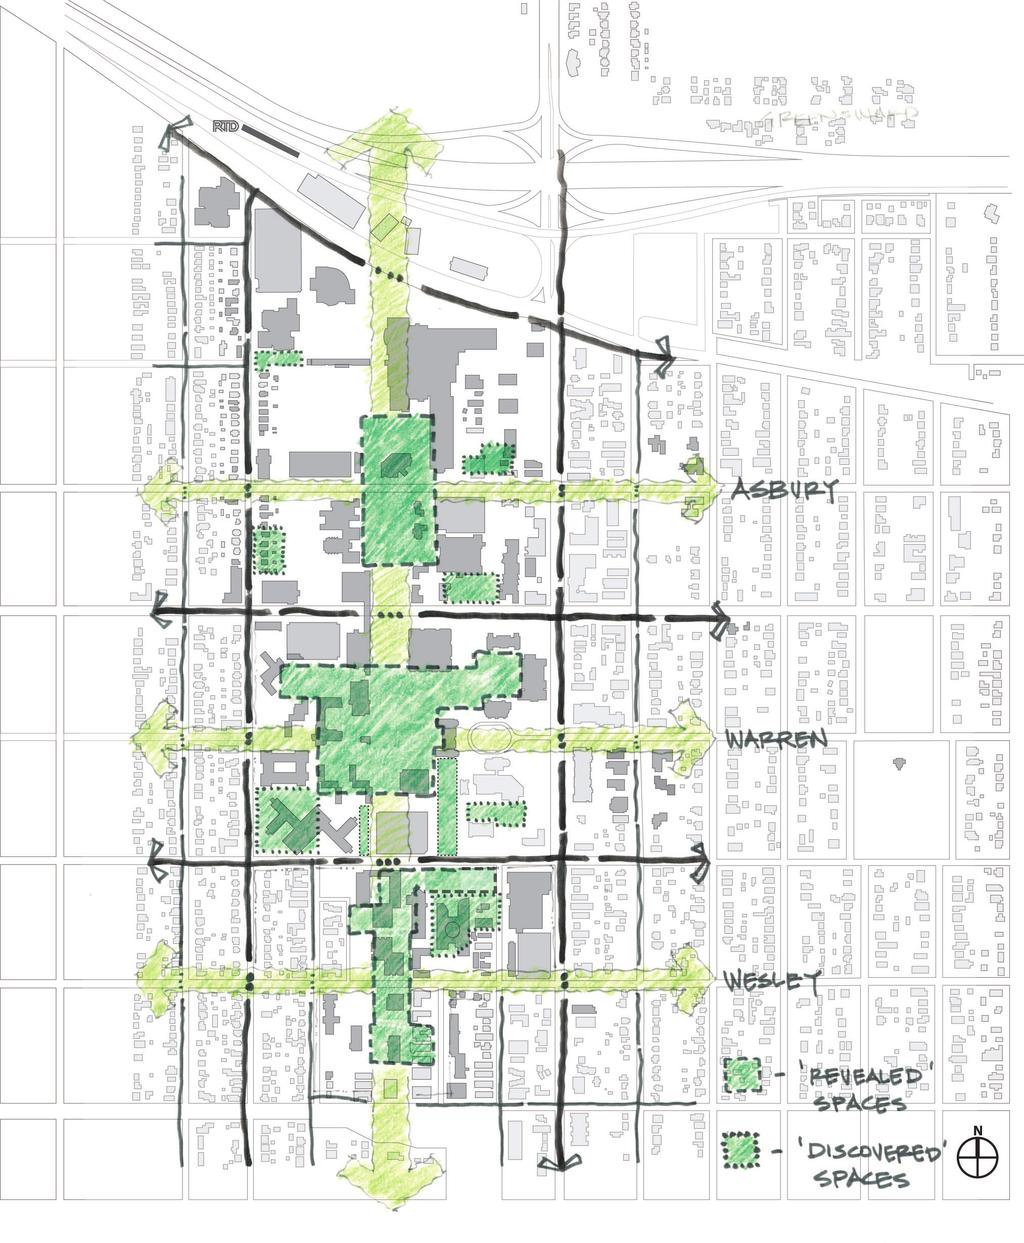 c. The need to re-align current and future development projects with the initial planning principles; Promenade, access to the Regional Transportation District (RTD) University of Denver (DU) Light